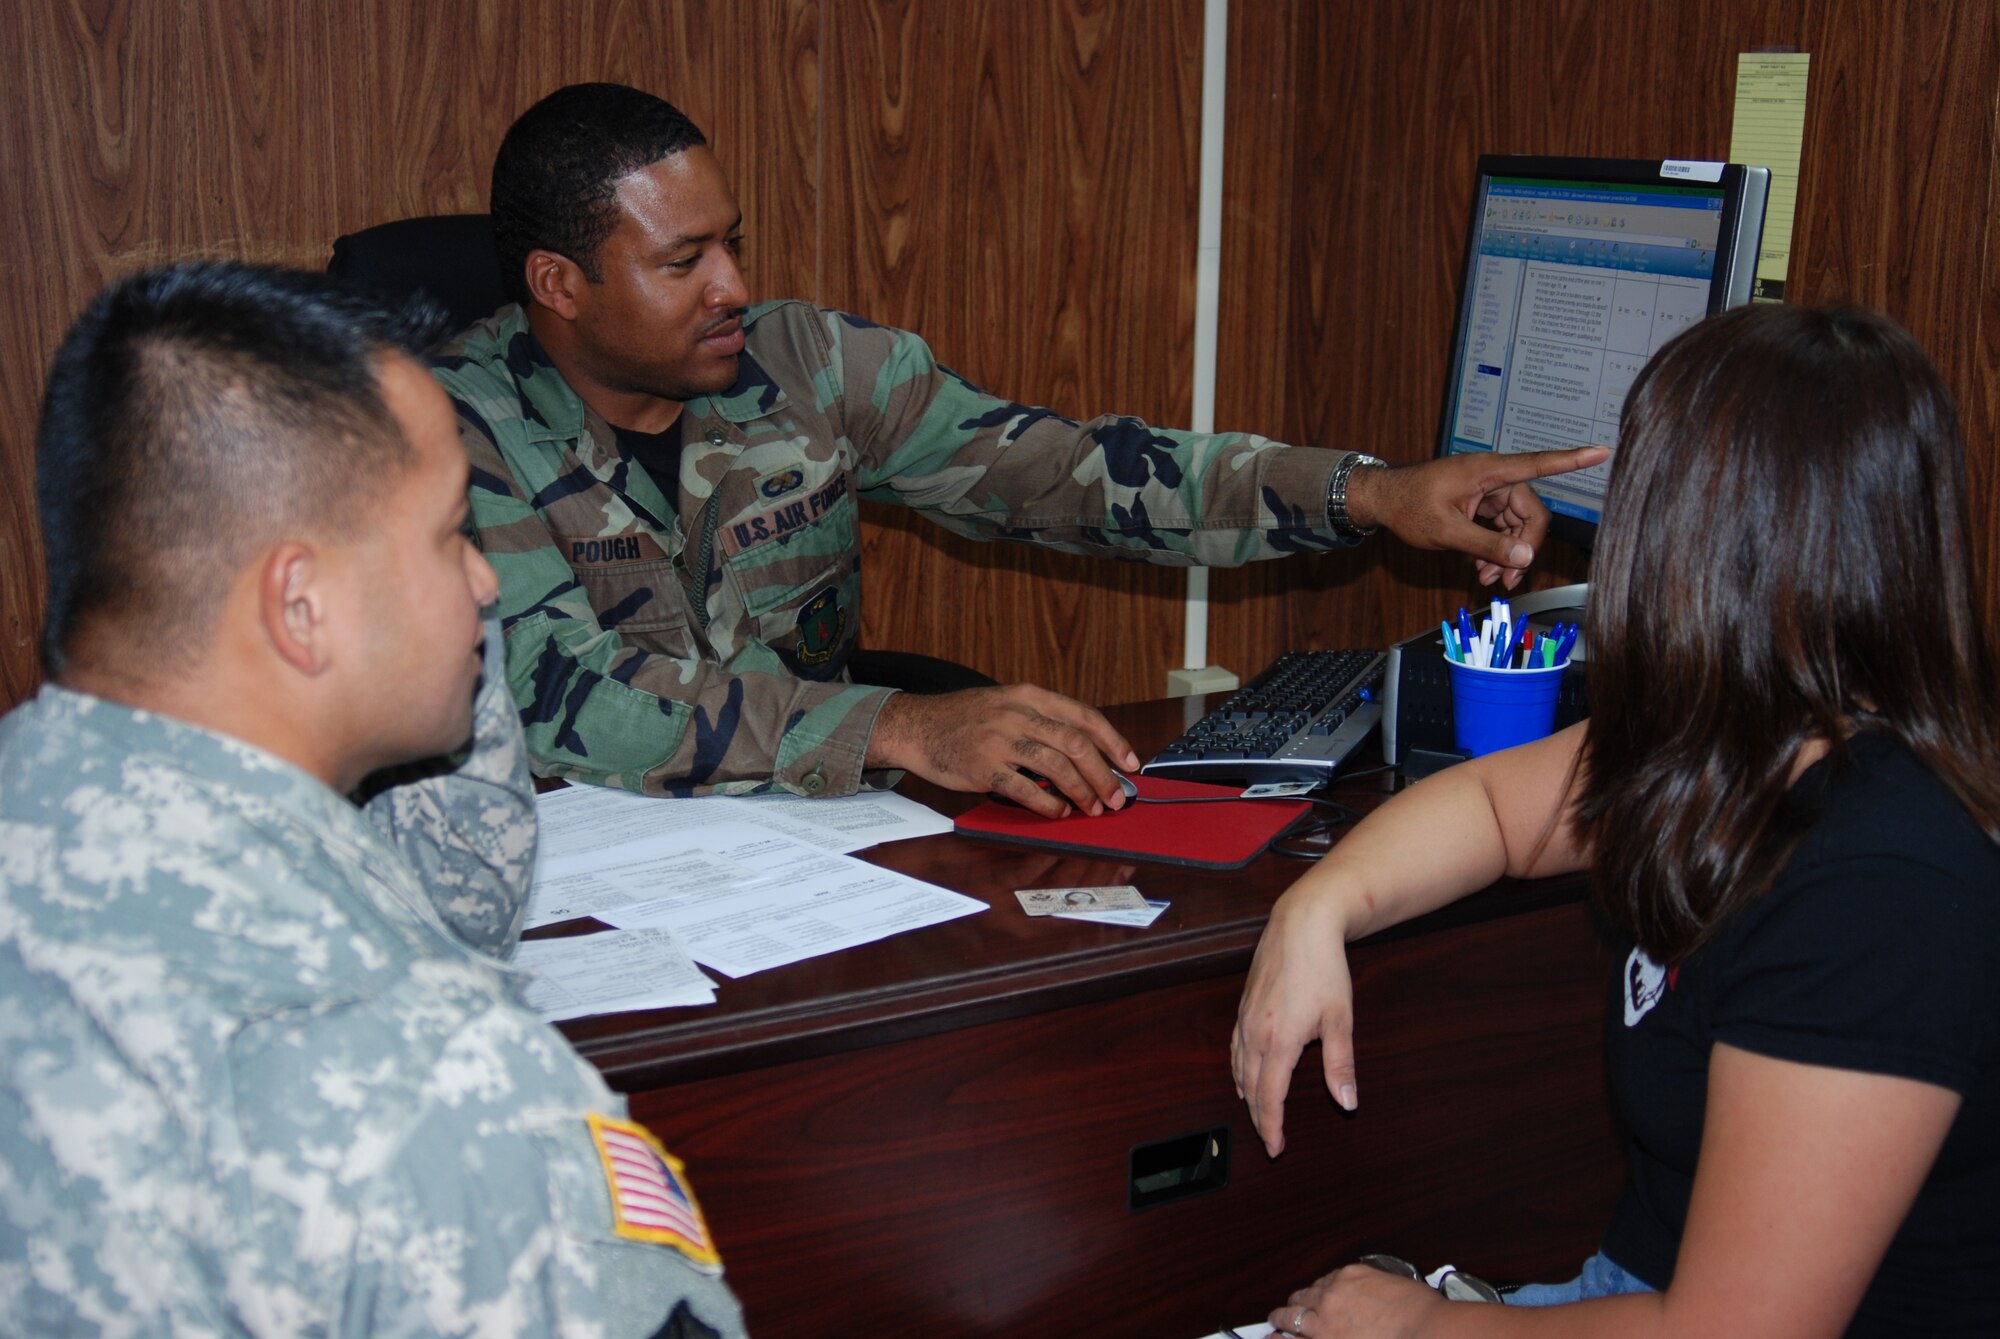 Staff Sgt. Michael Pough, tax center volunteer, helps customers prepare their tax return.  The tax center is a resource for base employees to obtain free tax assistance. (Photo by Master Sgt. Ann Bennett/36th Wing Public Affairs)